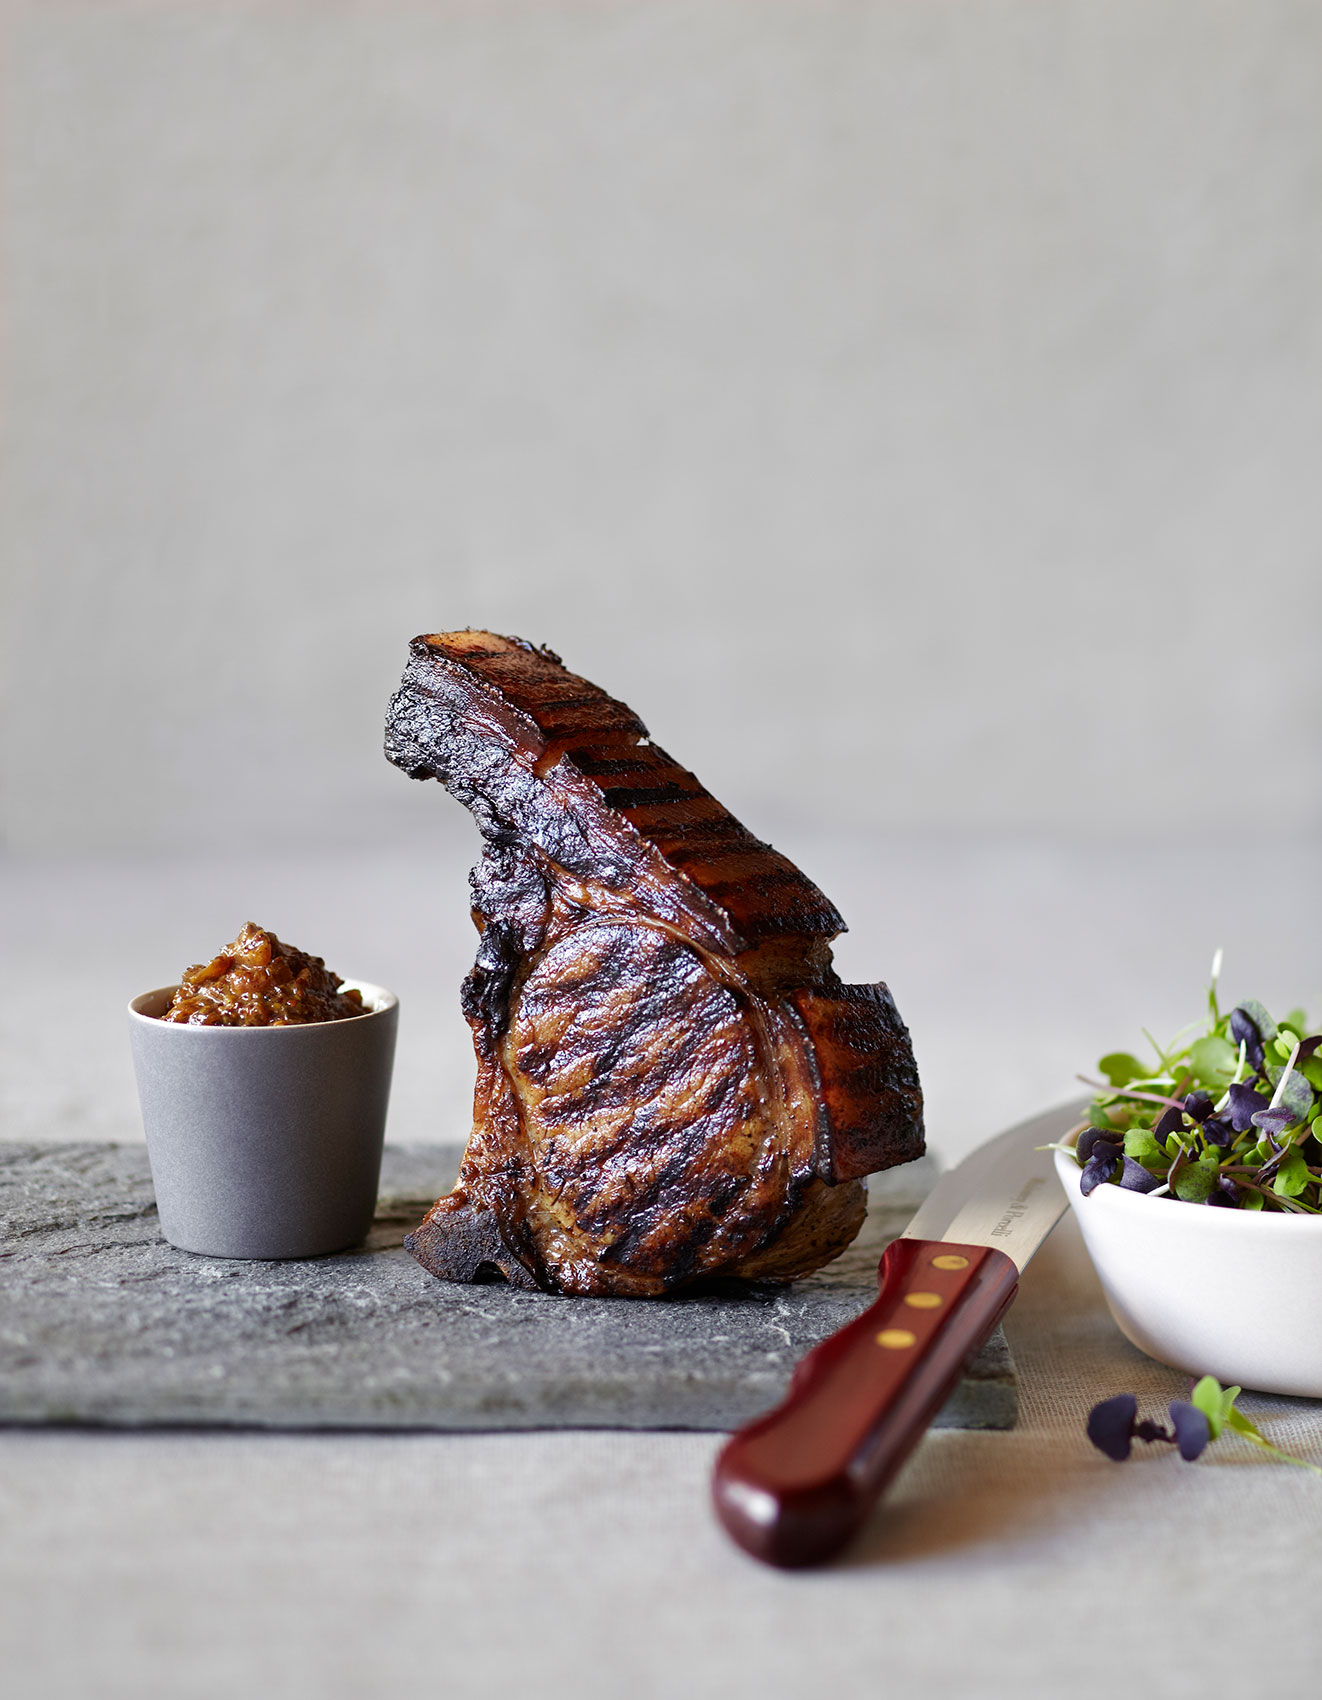 Vanilla Table • Standing Grilled Pork Chop on Stone Block with Steak Knife • Cookbook & Editorial Food Photography